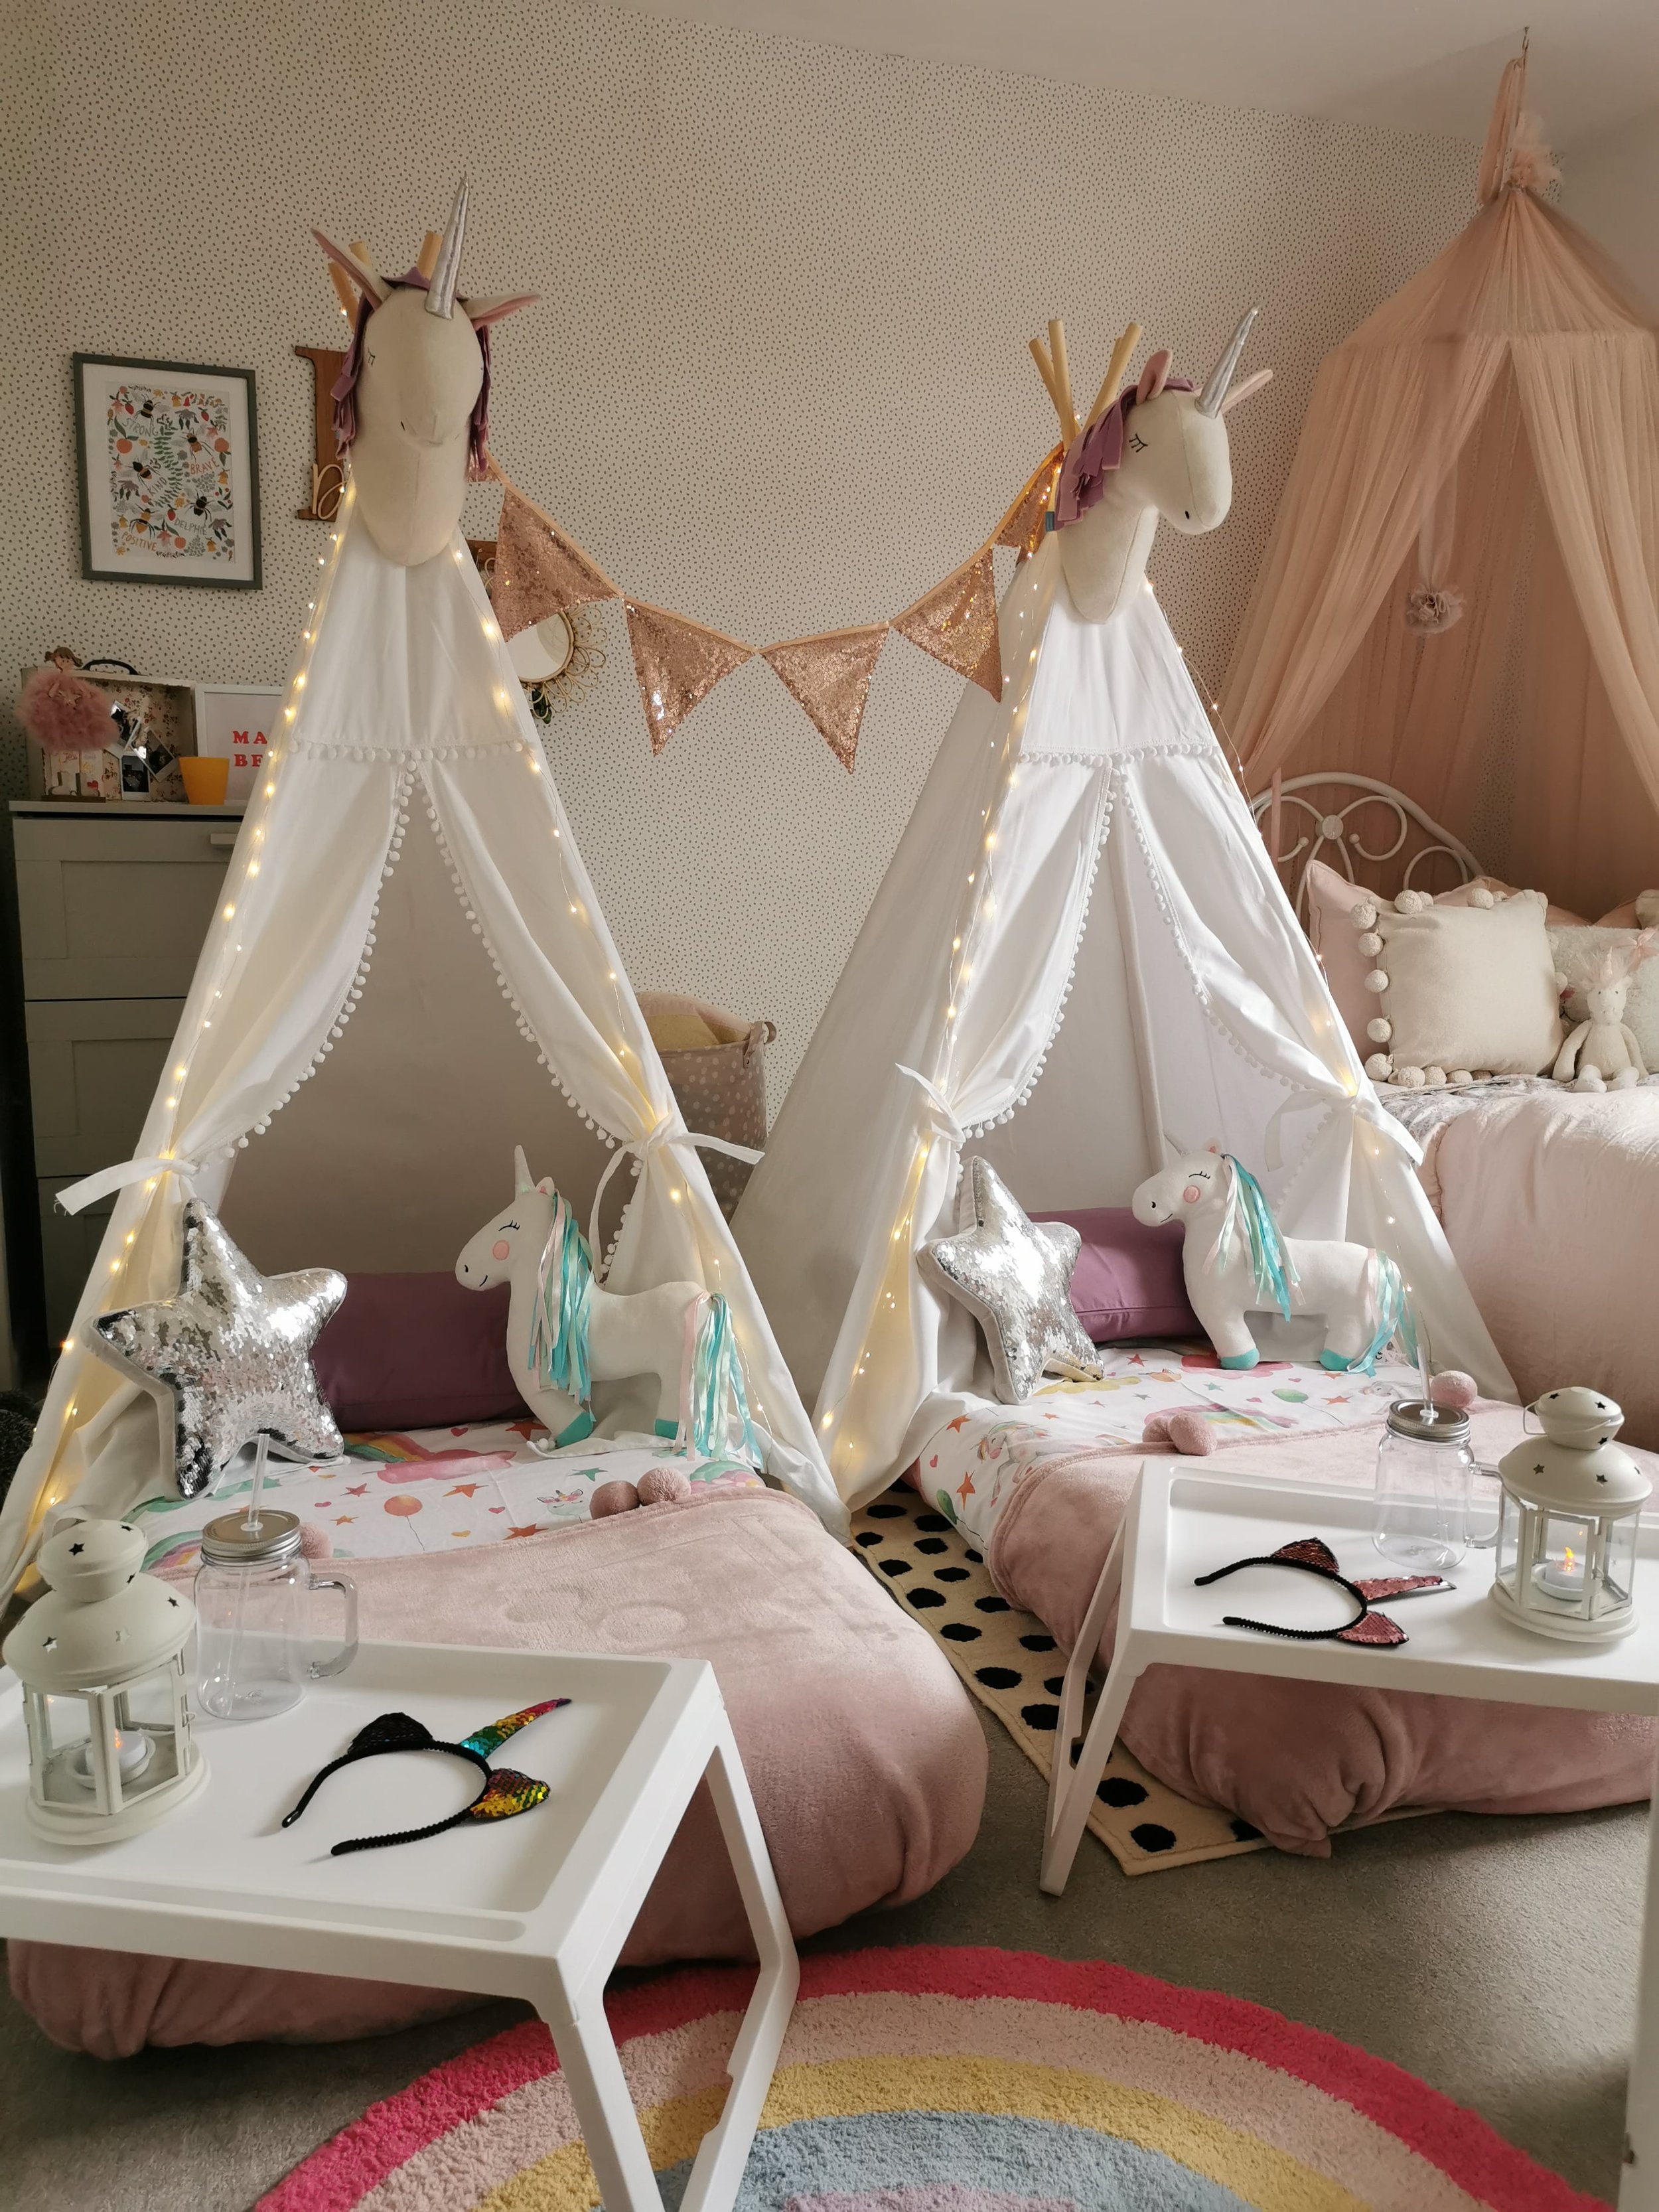 Glampees - Sleepover Parties in Wiltshire